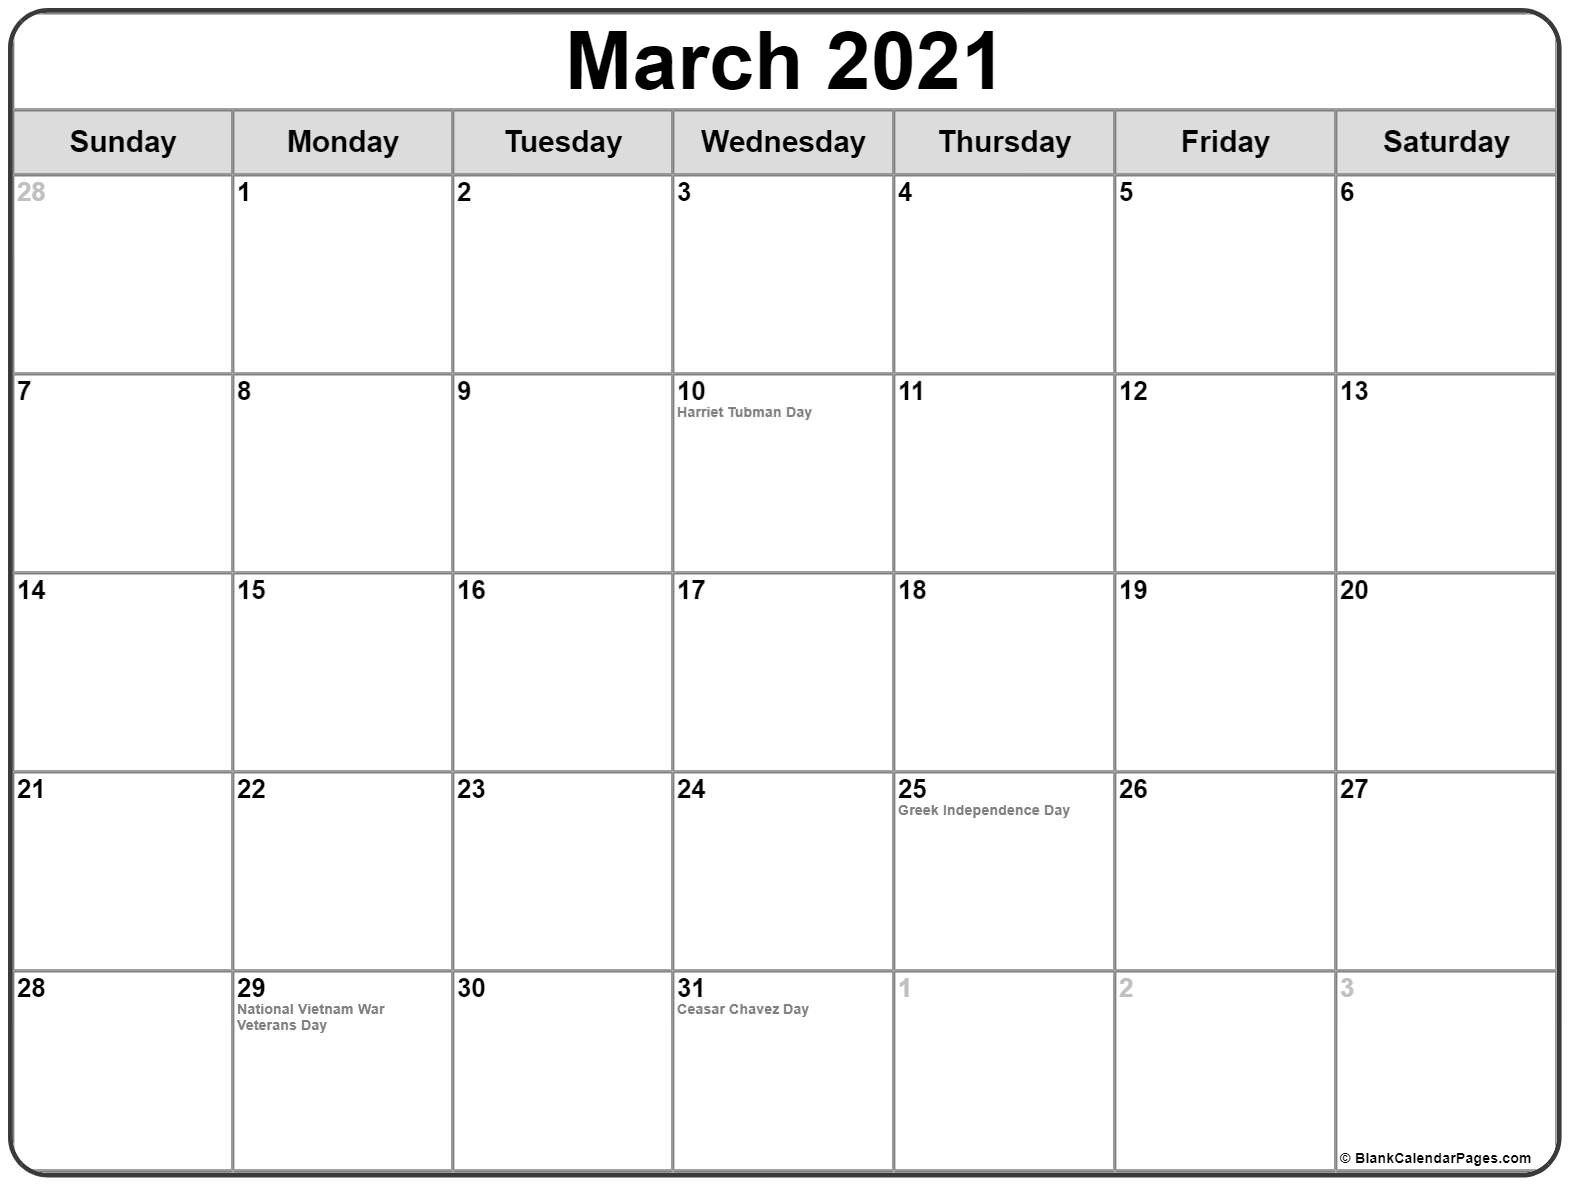 March 2021 calendar with holidays